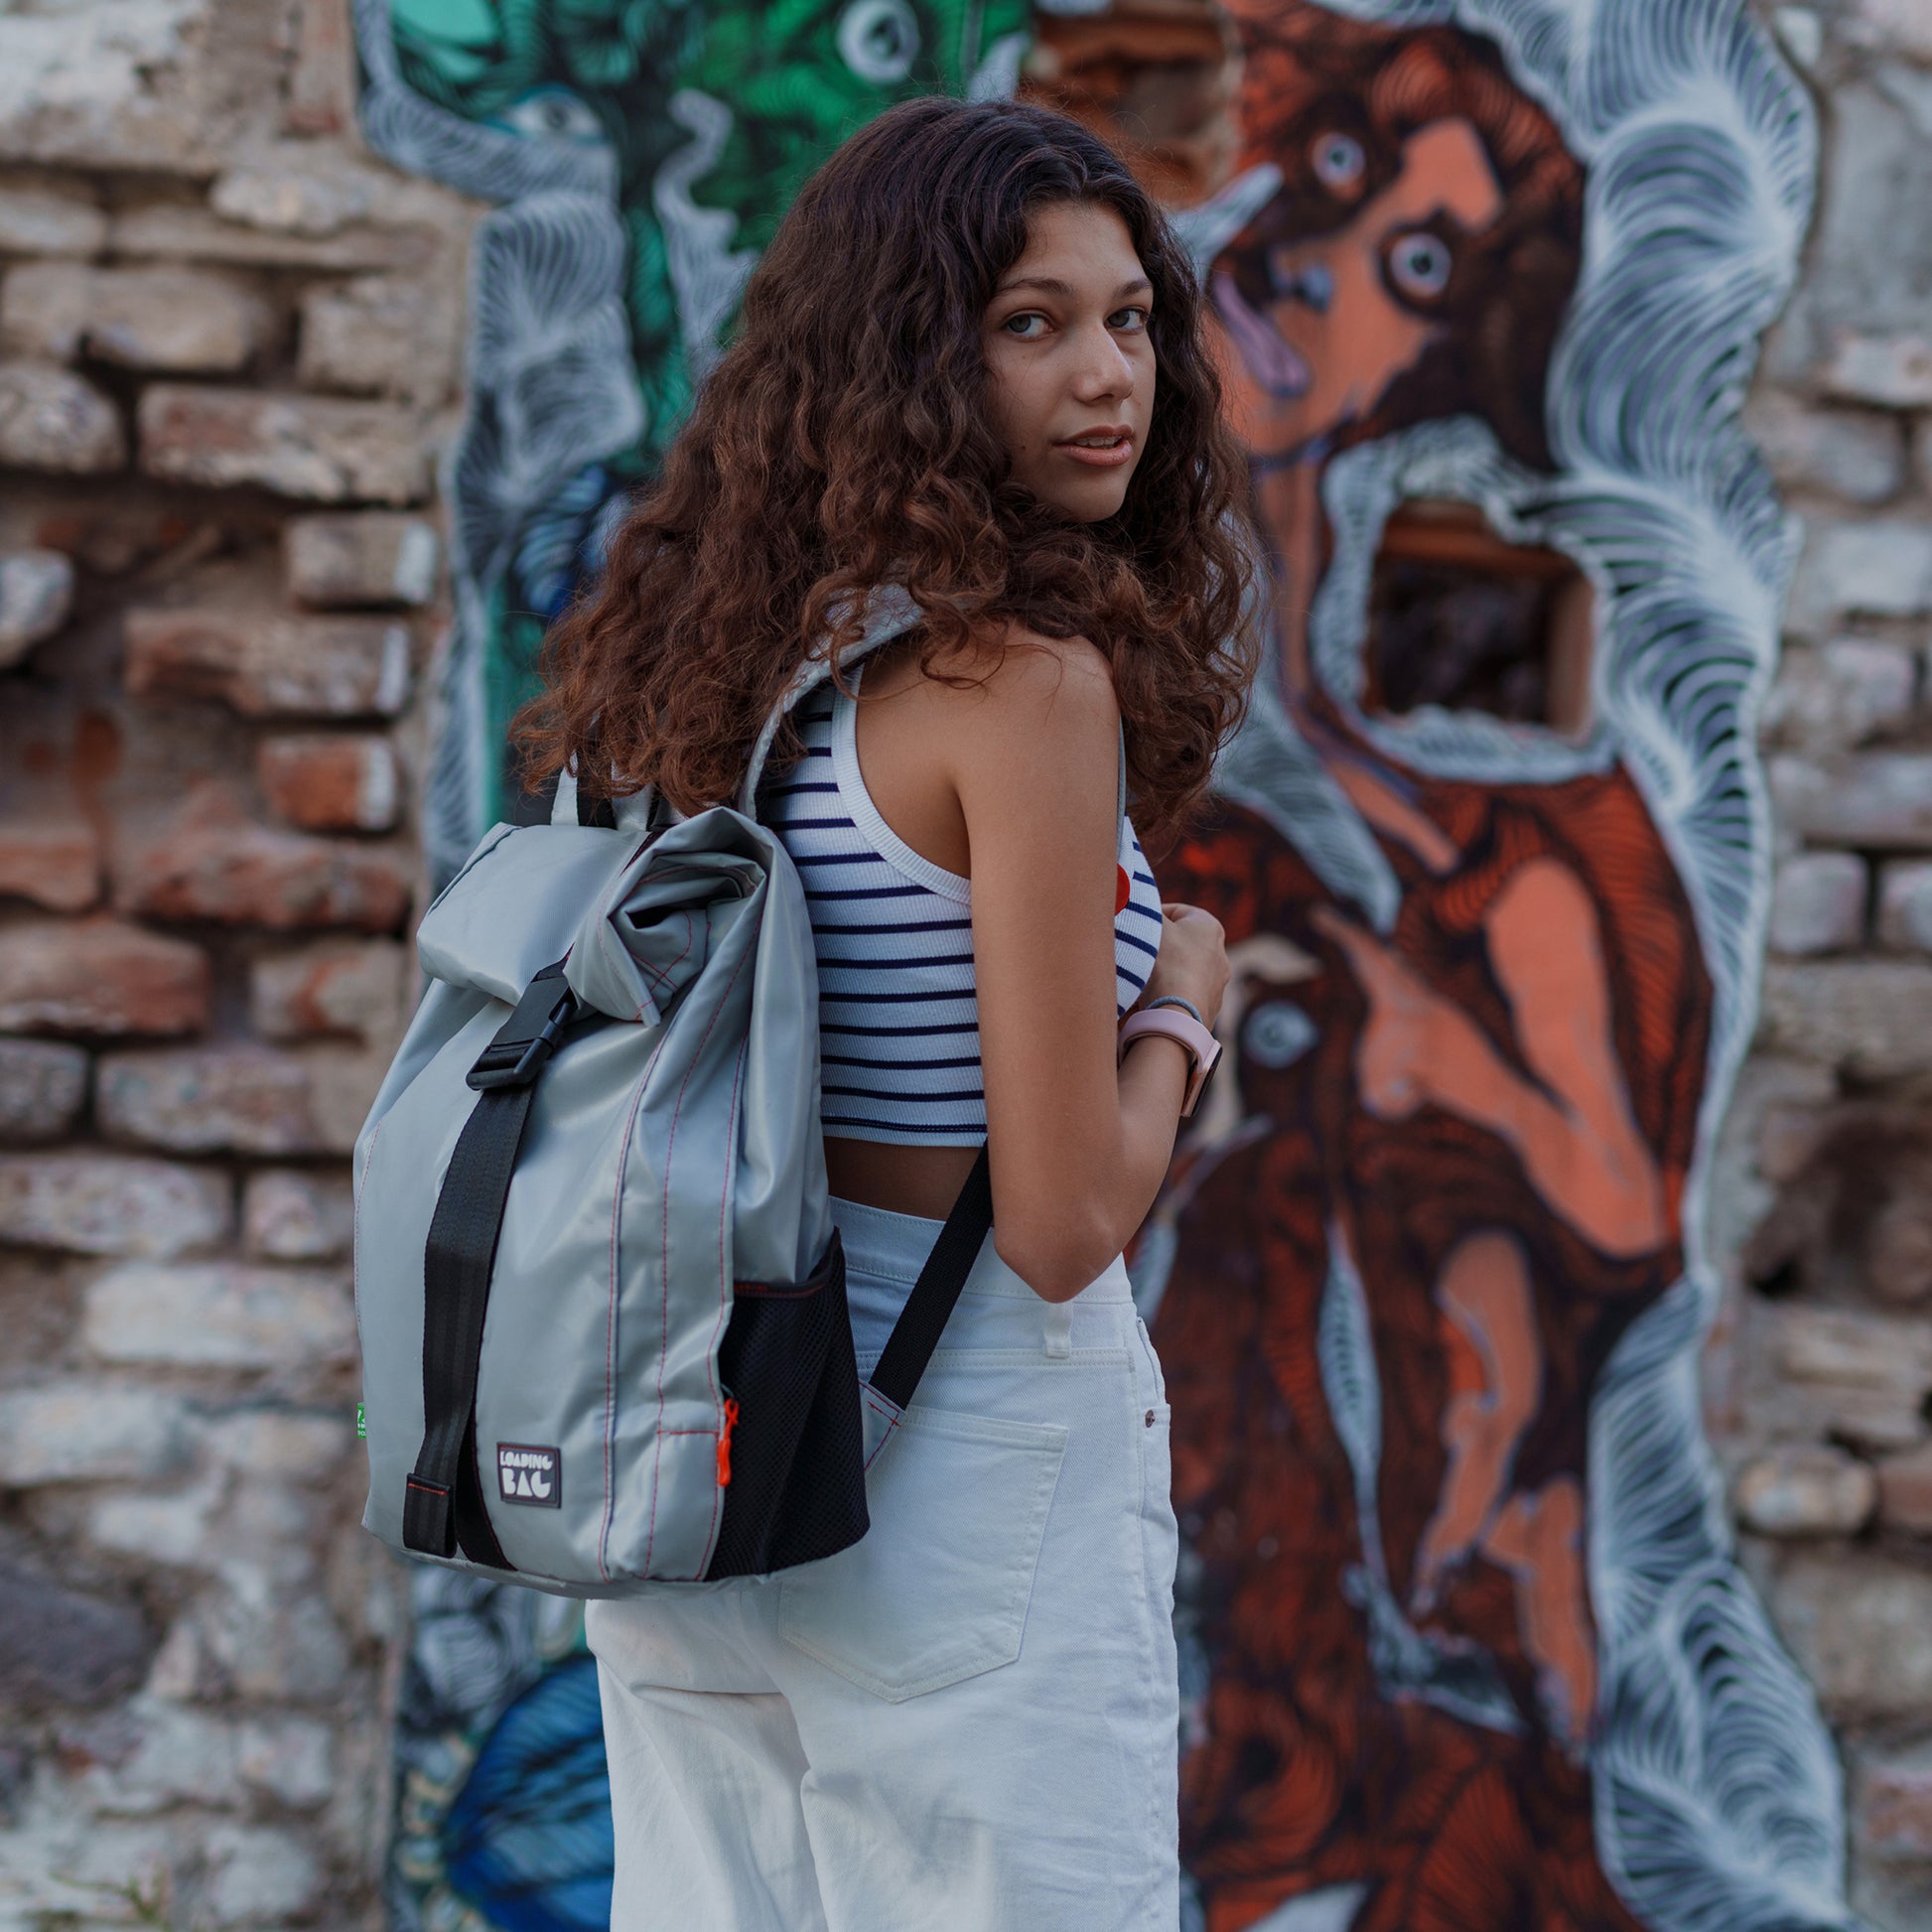  🌟 Urban Rolltop Backpack - Style meets Sustainability!  Upcycled, waterproof, durable.  Padded straps, luggage straps.  Perfect for laptops, books, travel.  Embrace sustainability in style! 🌿💼✨